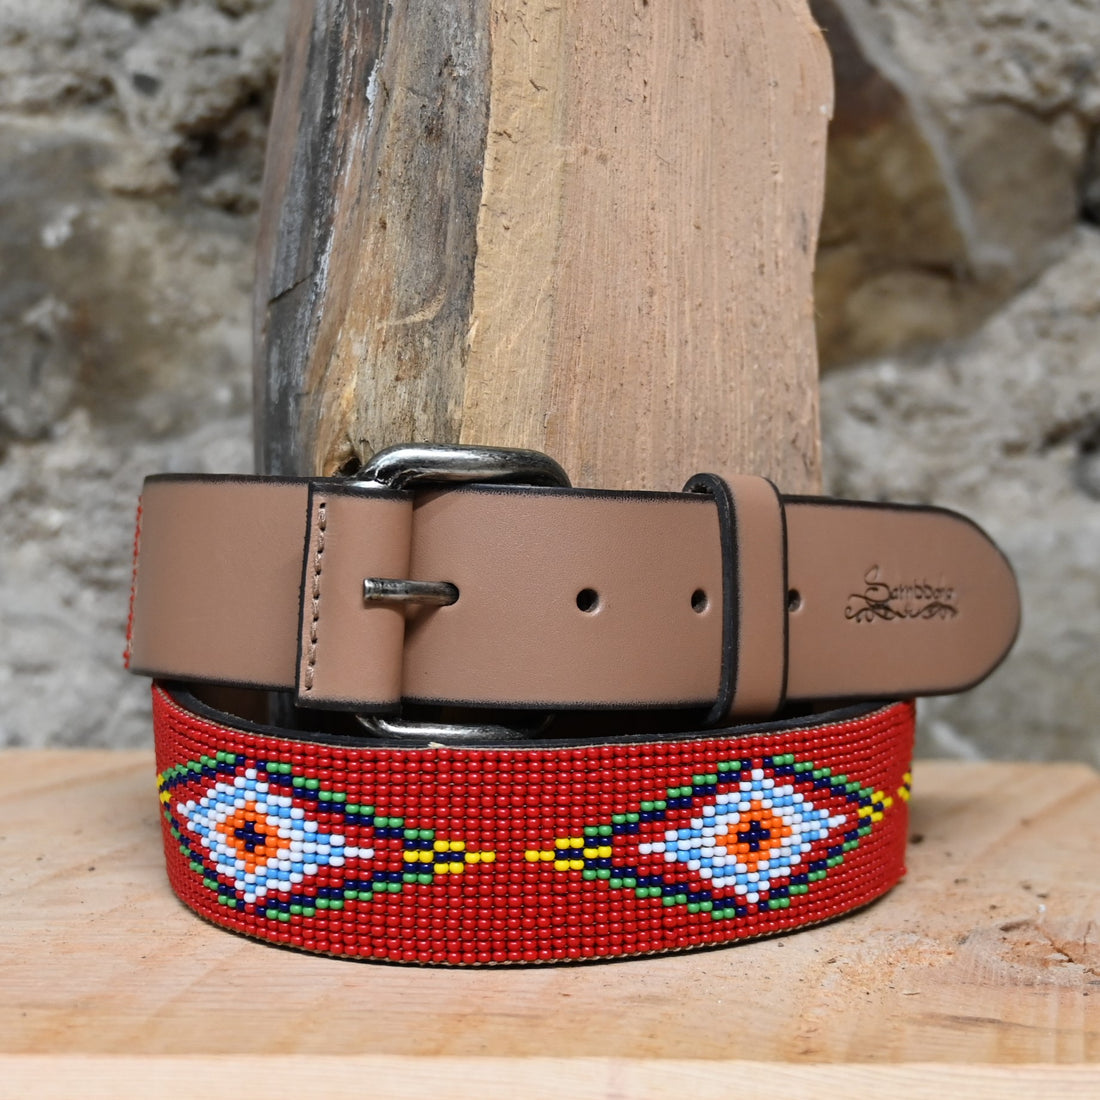 Red Vogue Sambboho Female L belt (with snap) view of buckle and pattern